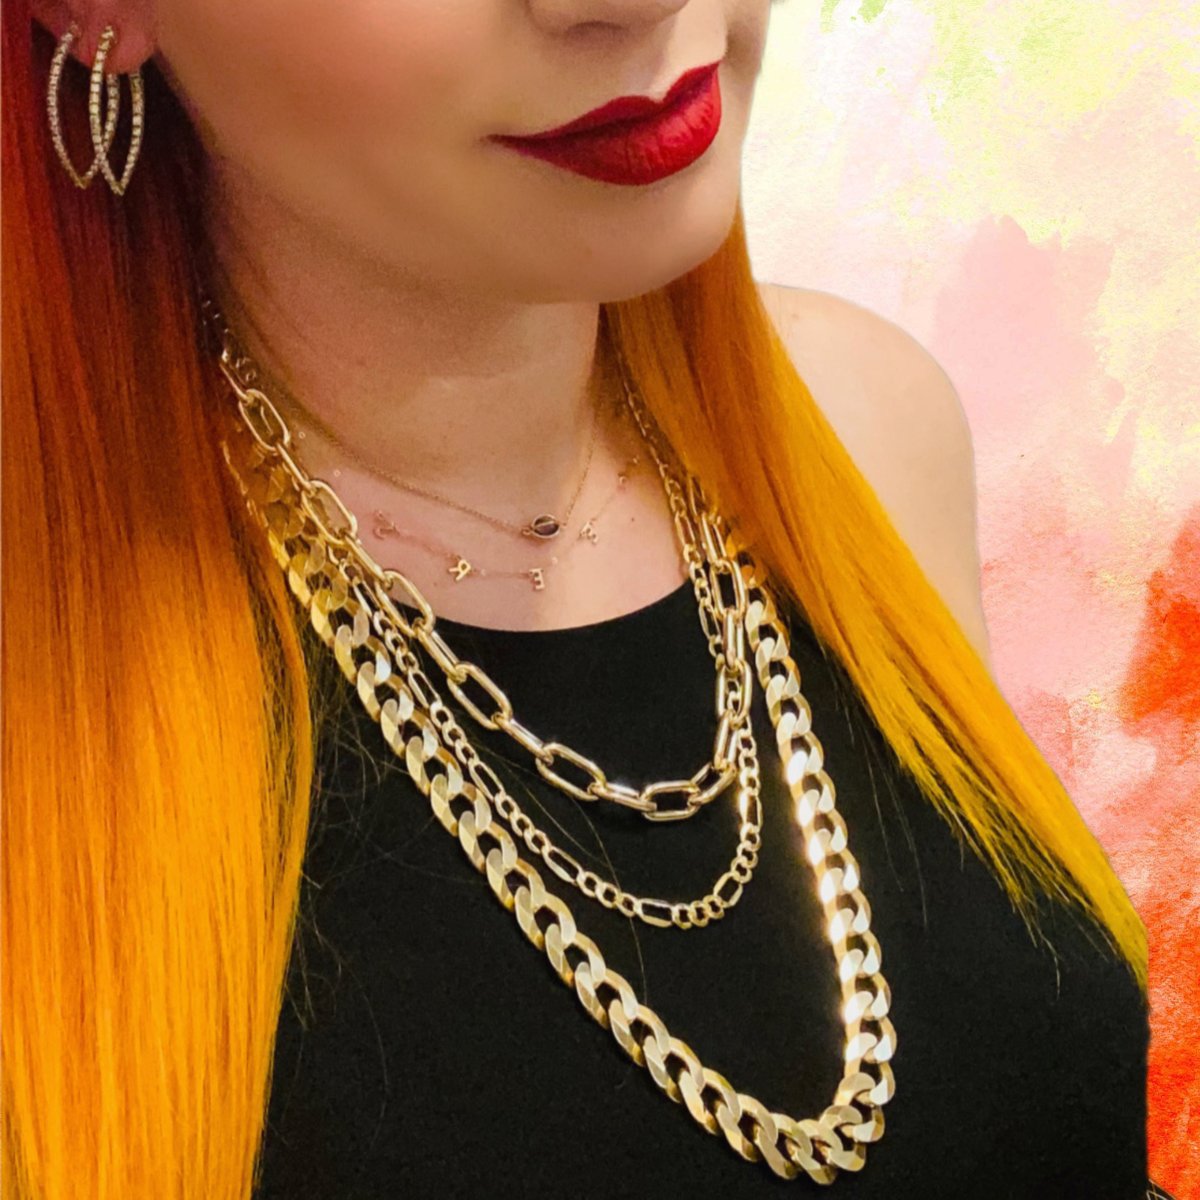 Spring is here! Enhance your collection with gold chains & layers! #ZalesEmployee #LoveZales #Gold #Chains #Necklaces #Fashion #SpringStyles